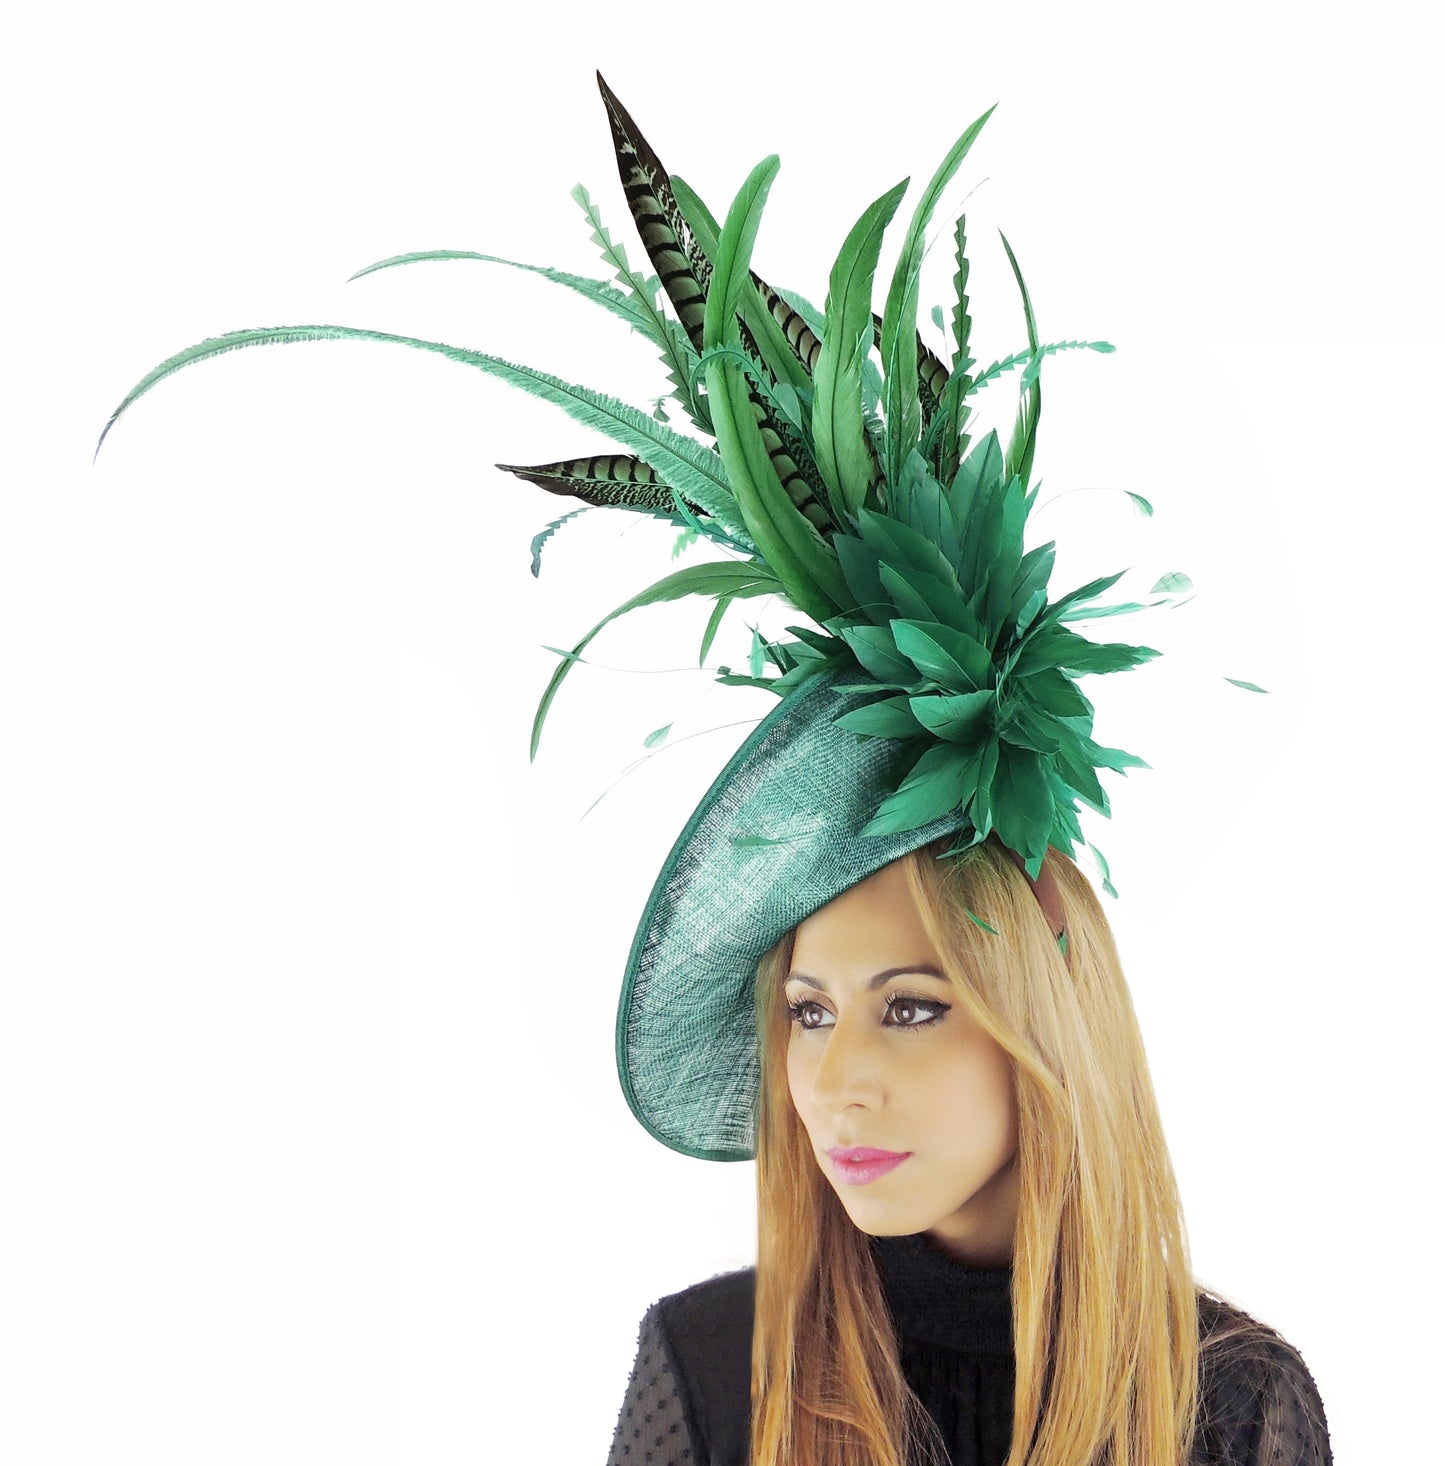 Caithness Large Statement Ascot Fascinator Hat - Hats By Cressida